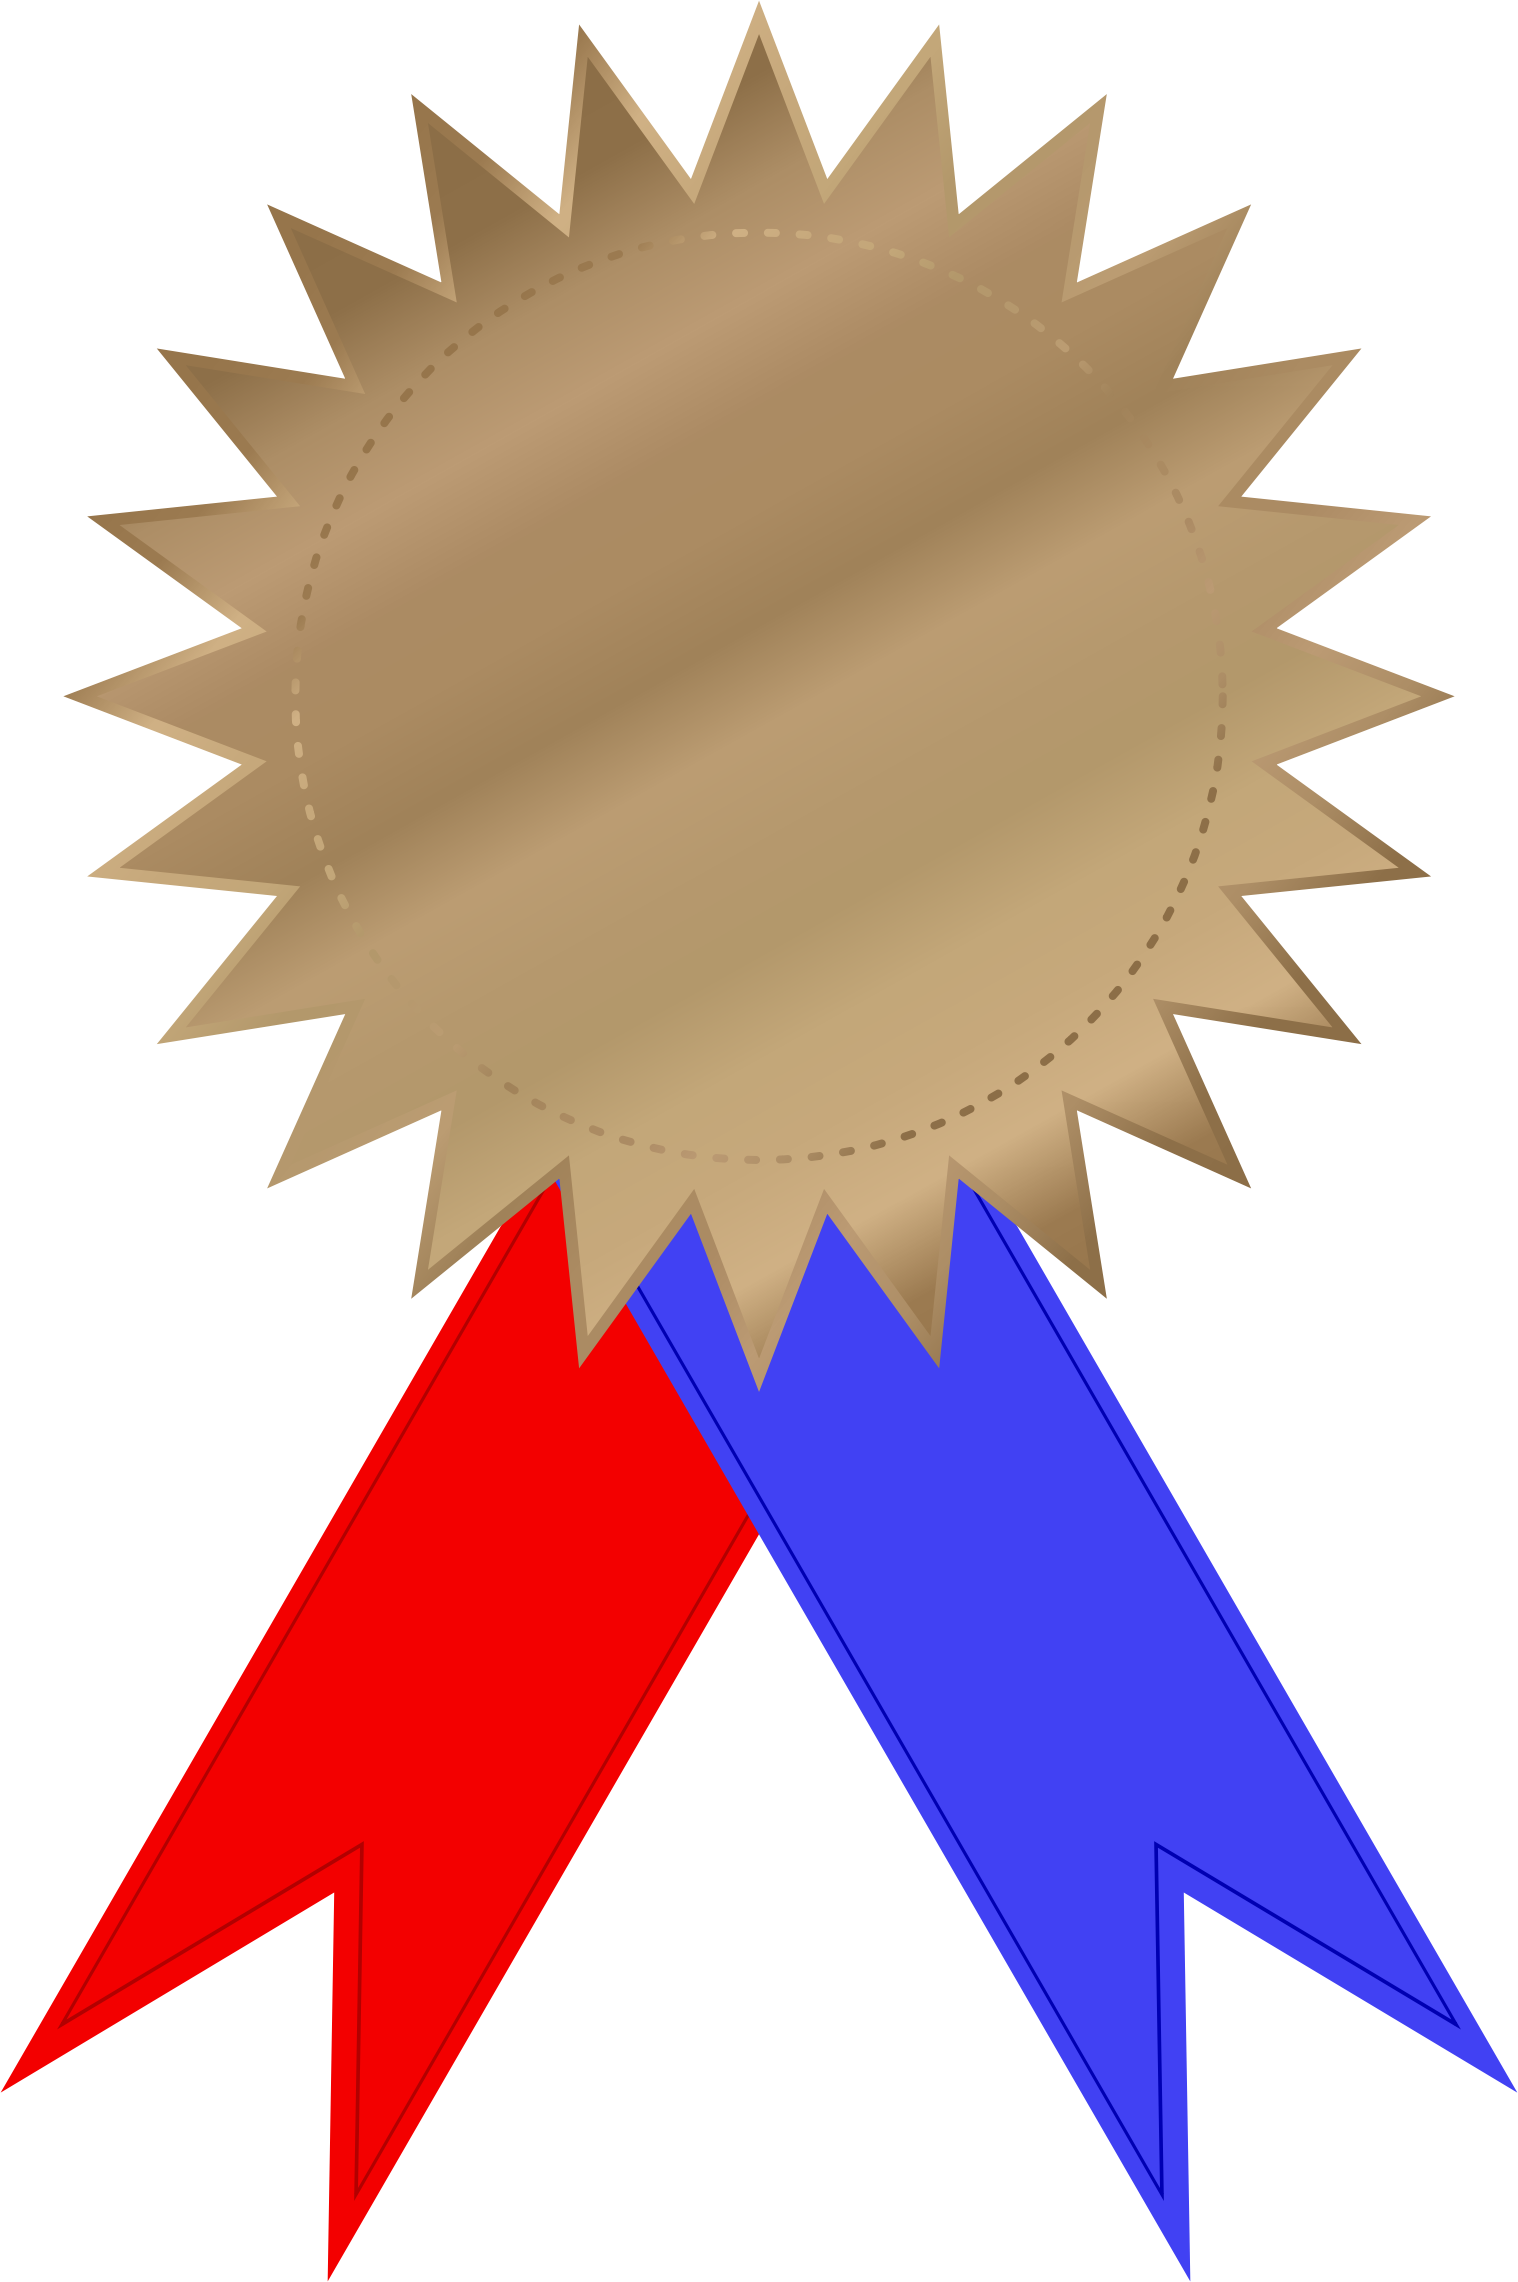 medal clipart recognition